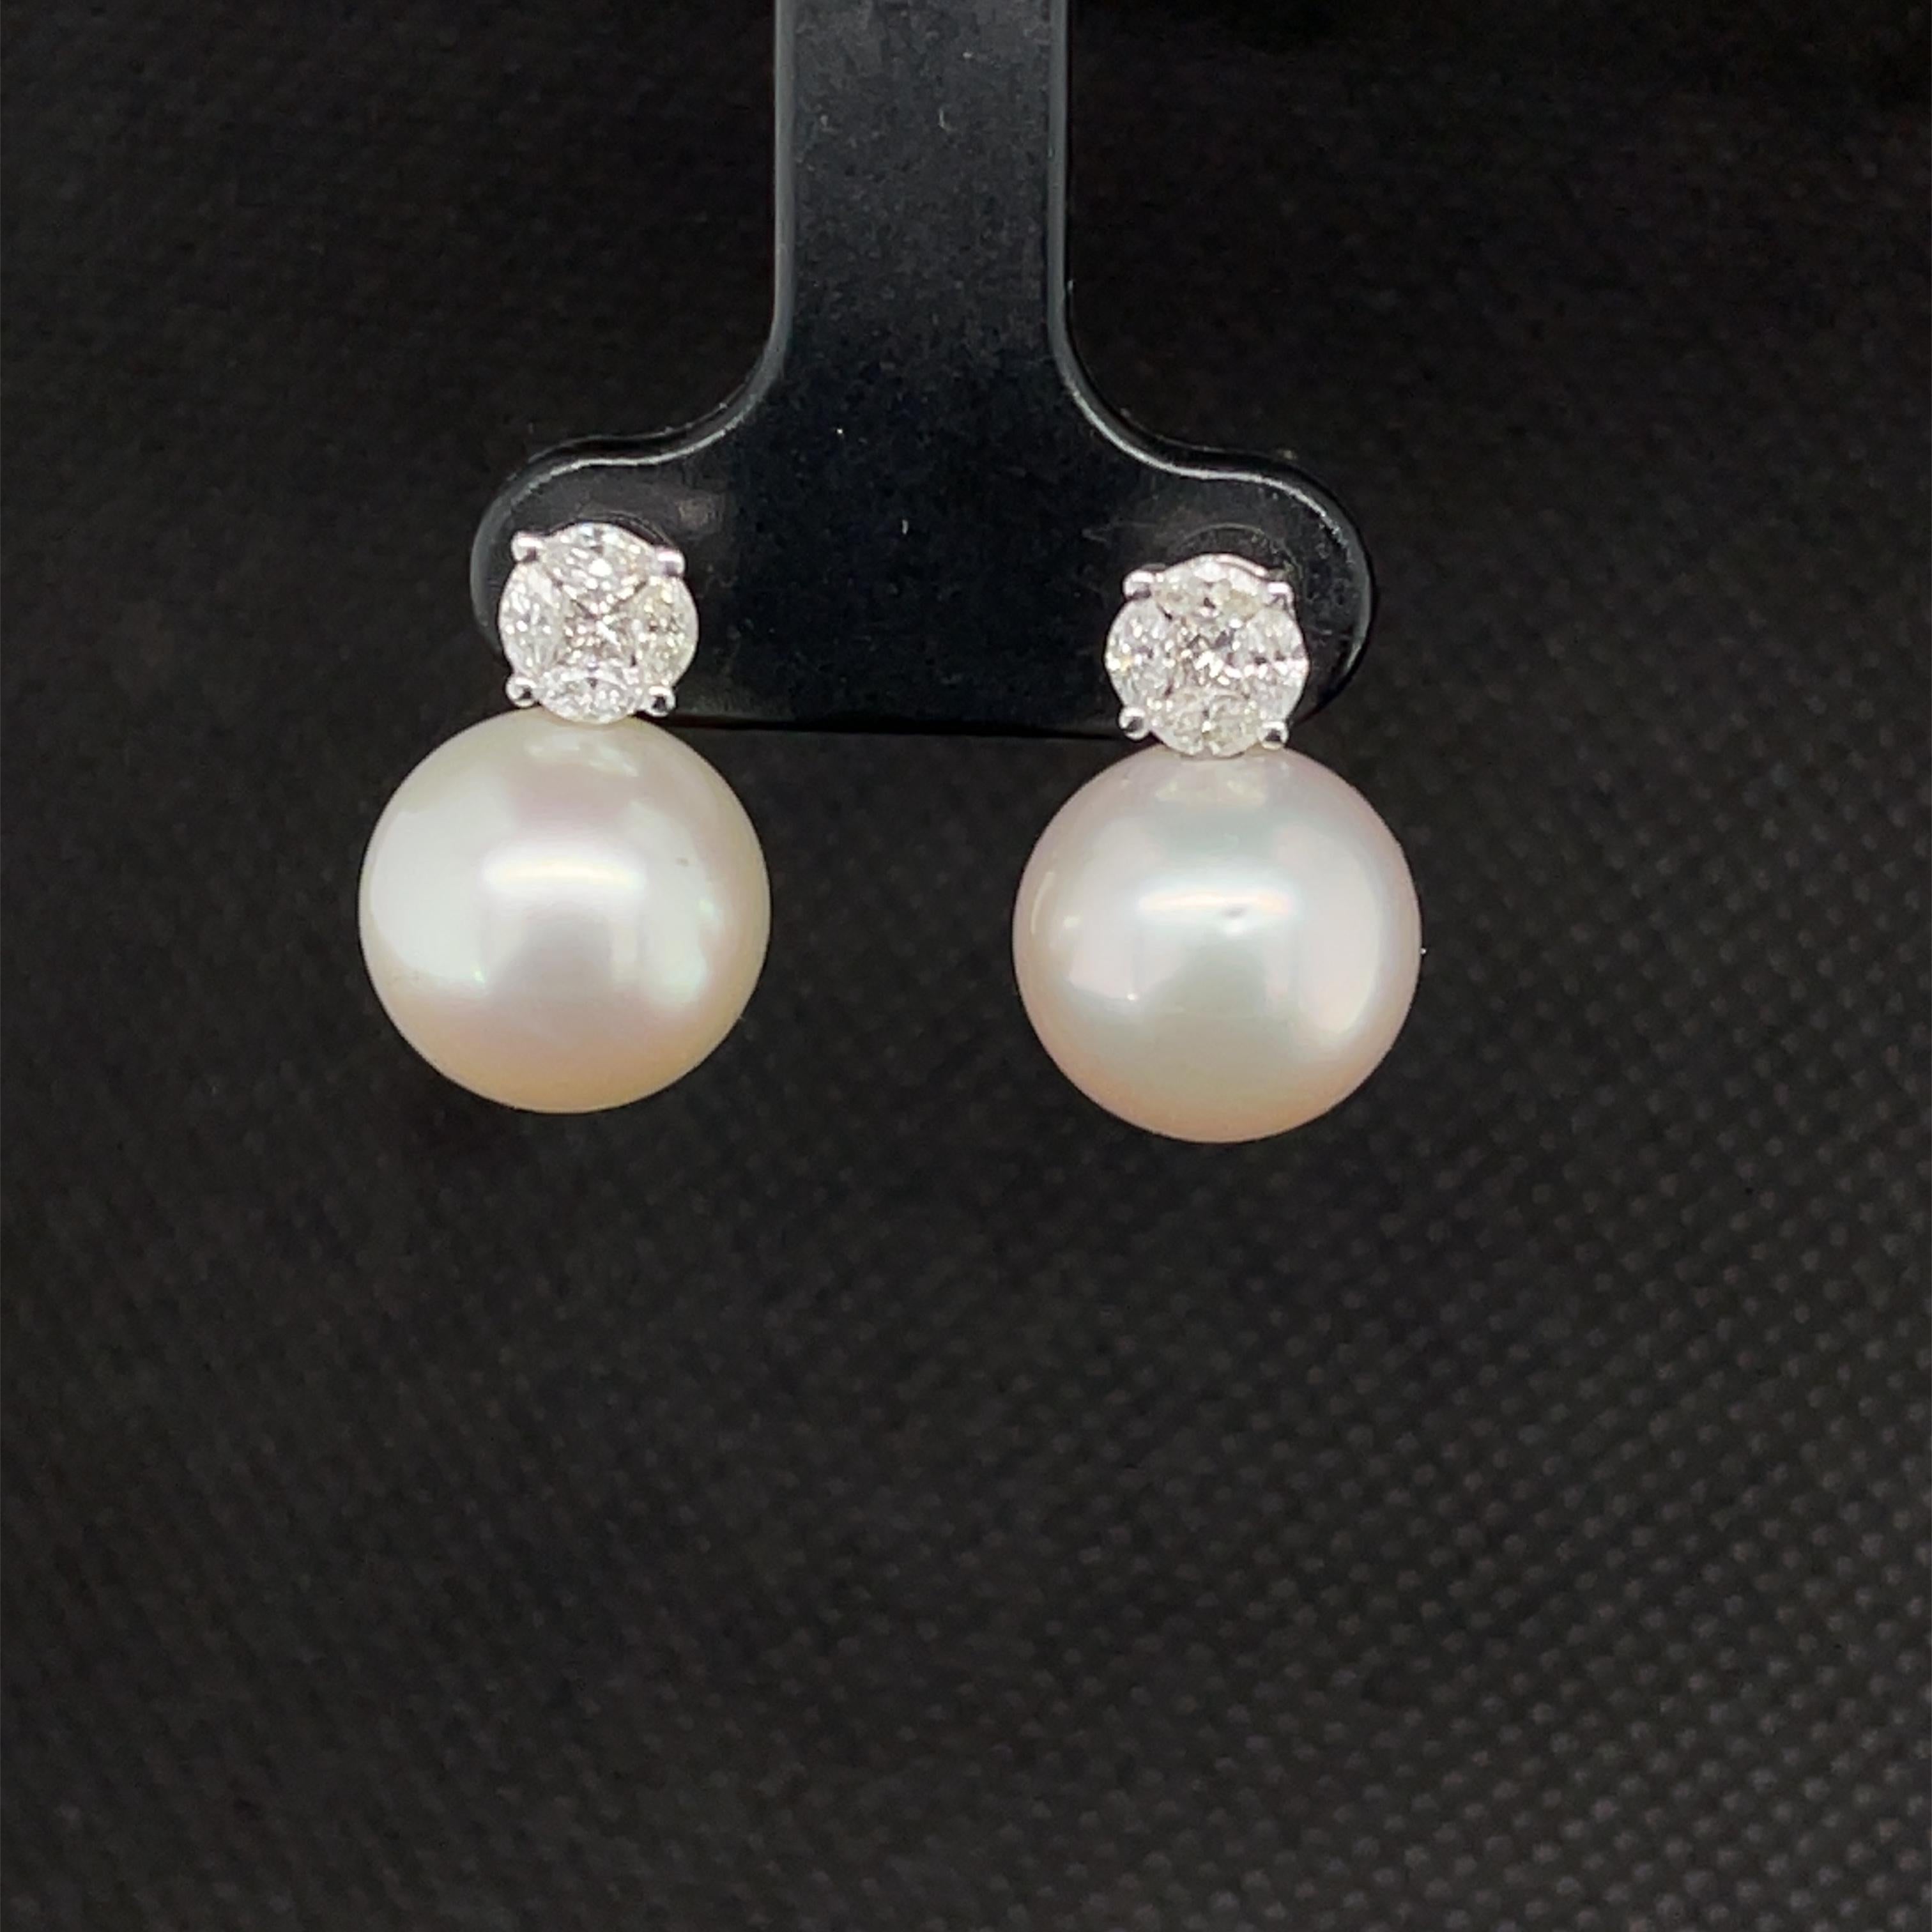 Set yourself apart with these gorgeous South Seas pearl and diamond drop earrings! These stunning earrings feature two large, 11mm, beautifully matched white South Seas pearls set in 18k white gold with princess and marquise-cut diamonds. Four